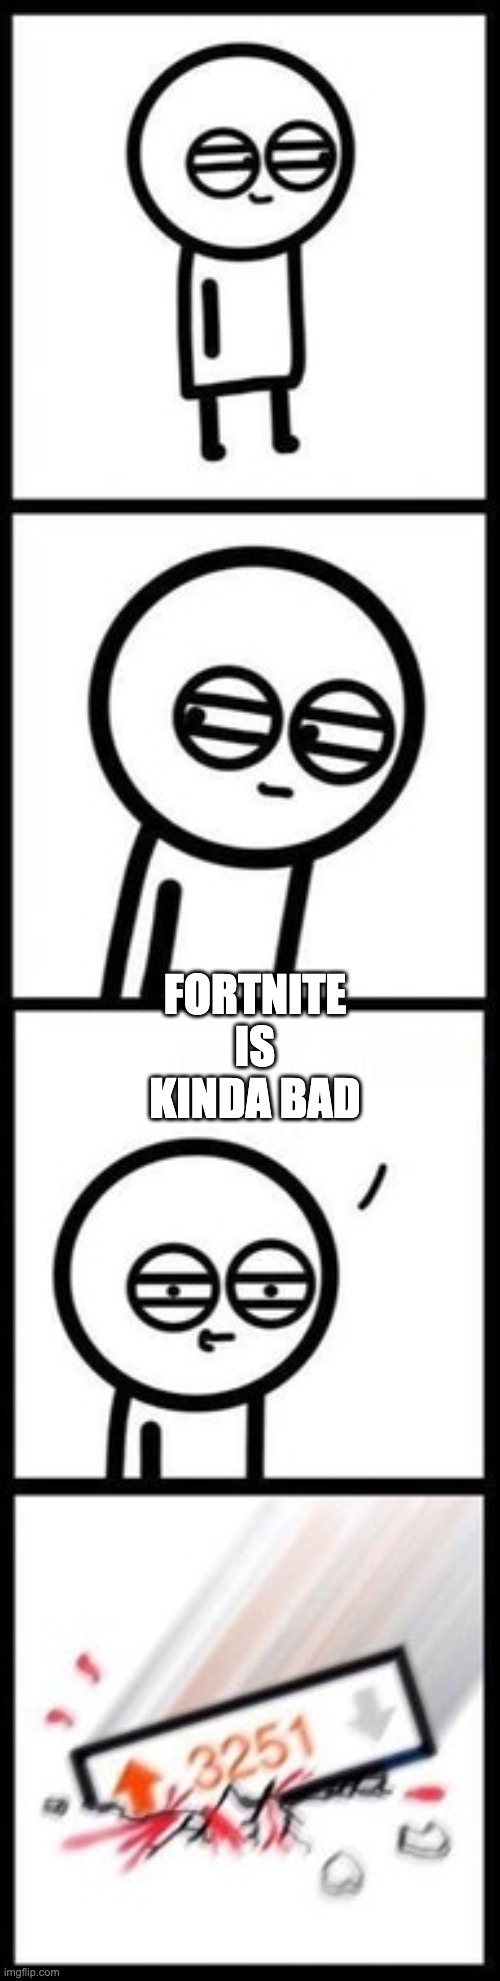 3251 upvotes | FORTNITE IS KINDA BAD | image tagged in 3251 upvotes | made w/ Imgflip meme maker